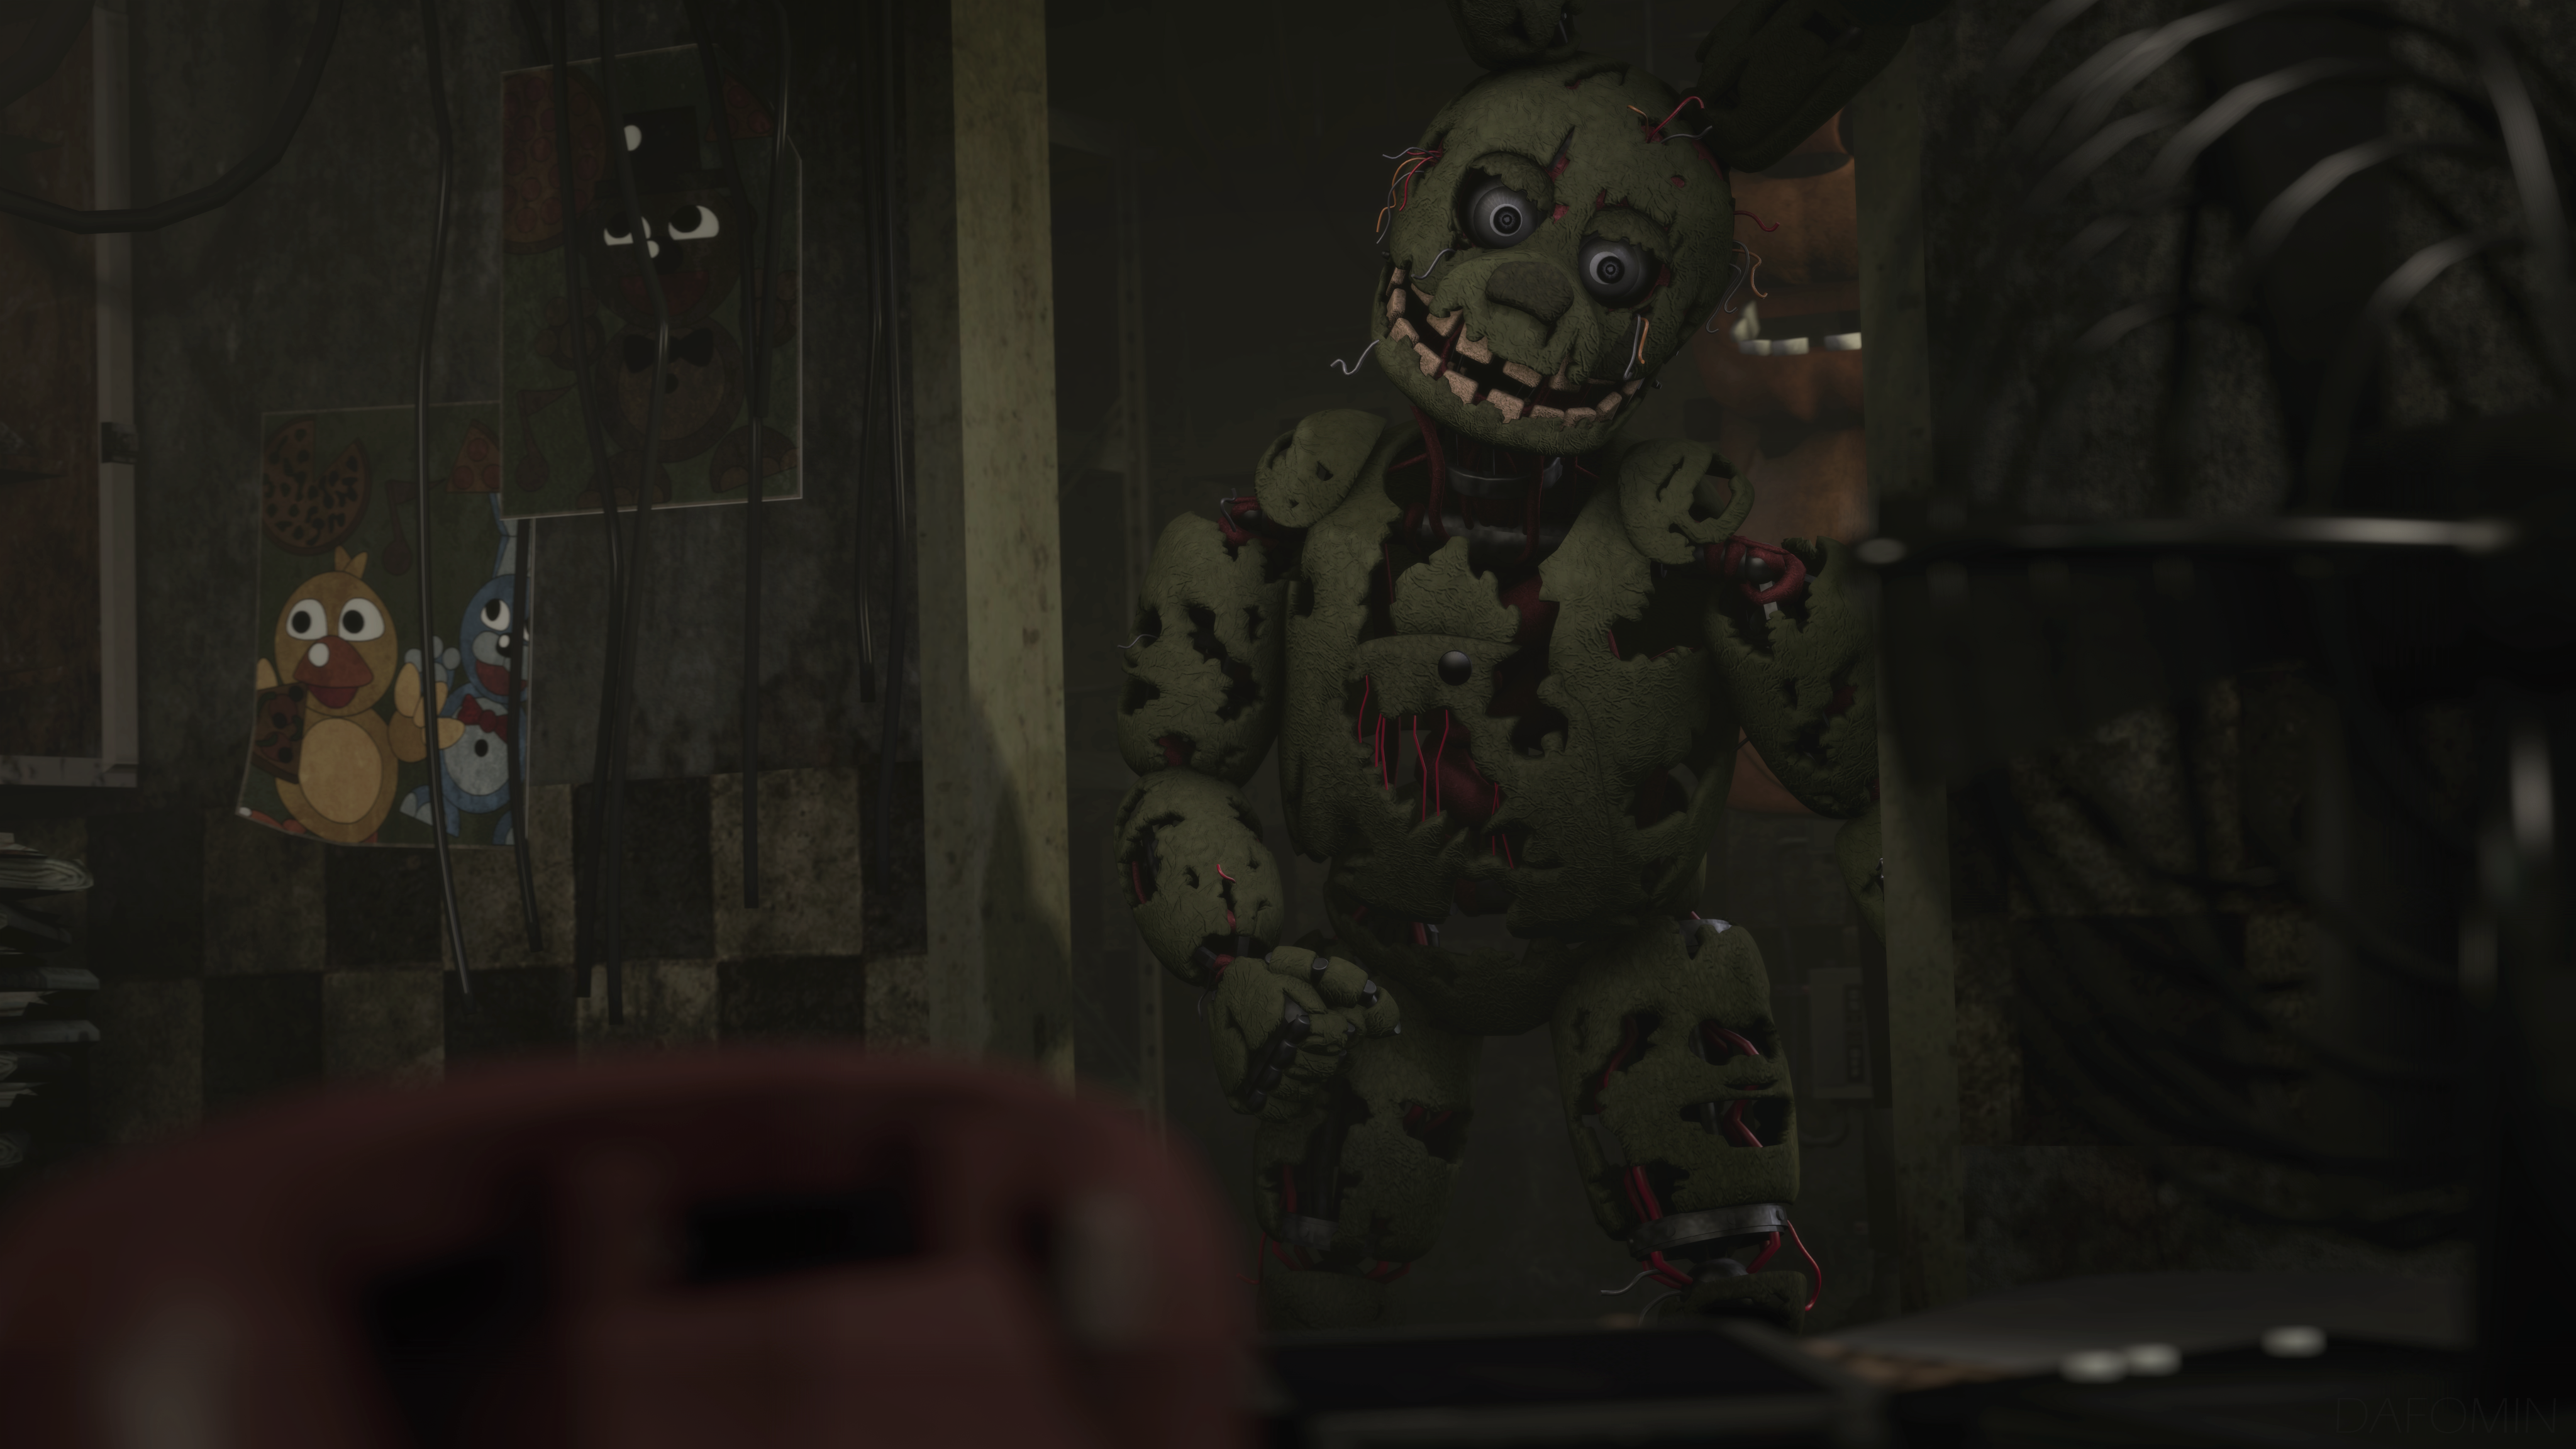 Video Game Five Nights At Freddy 039 S 3 4096x2304